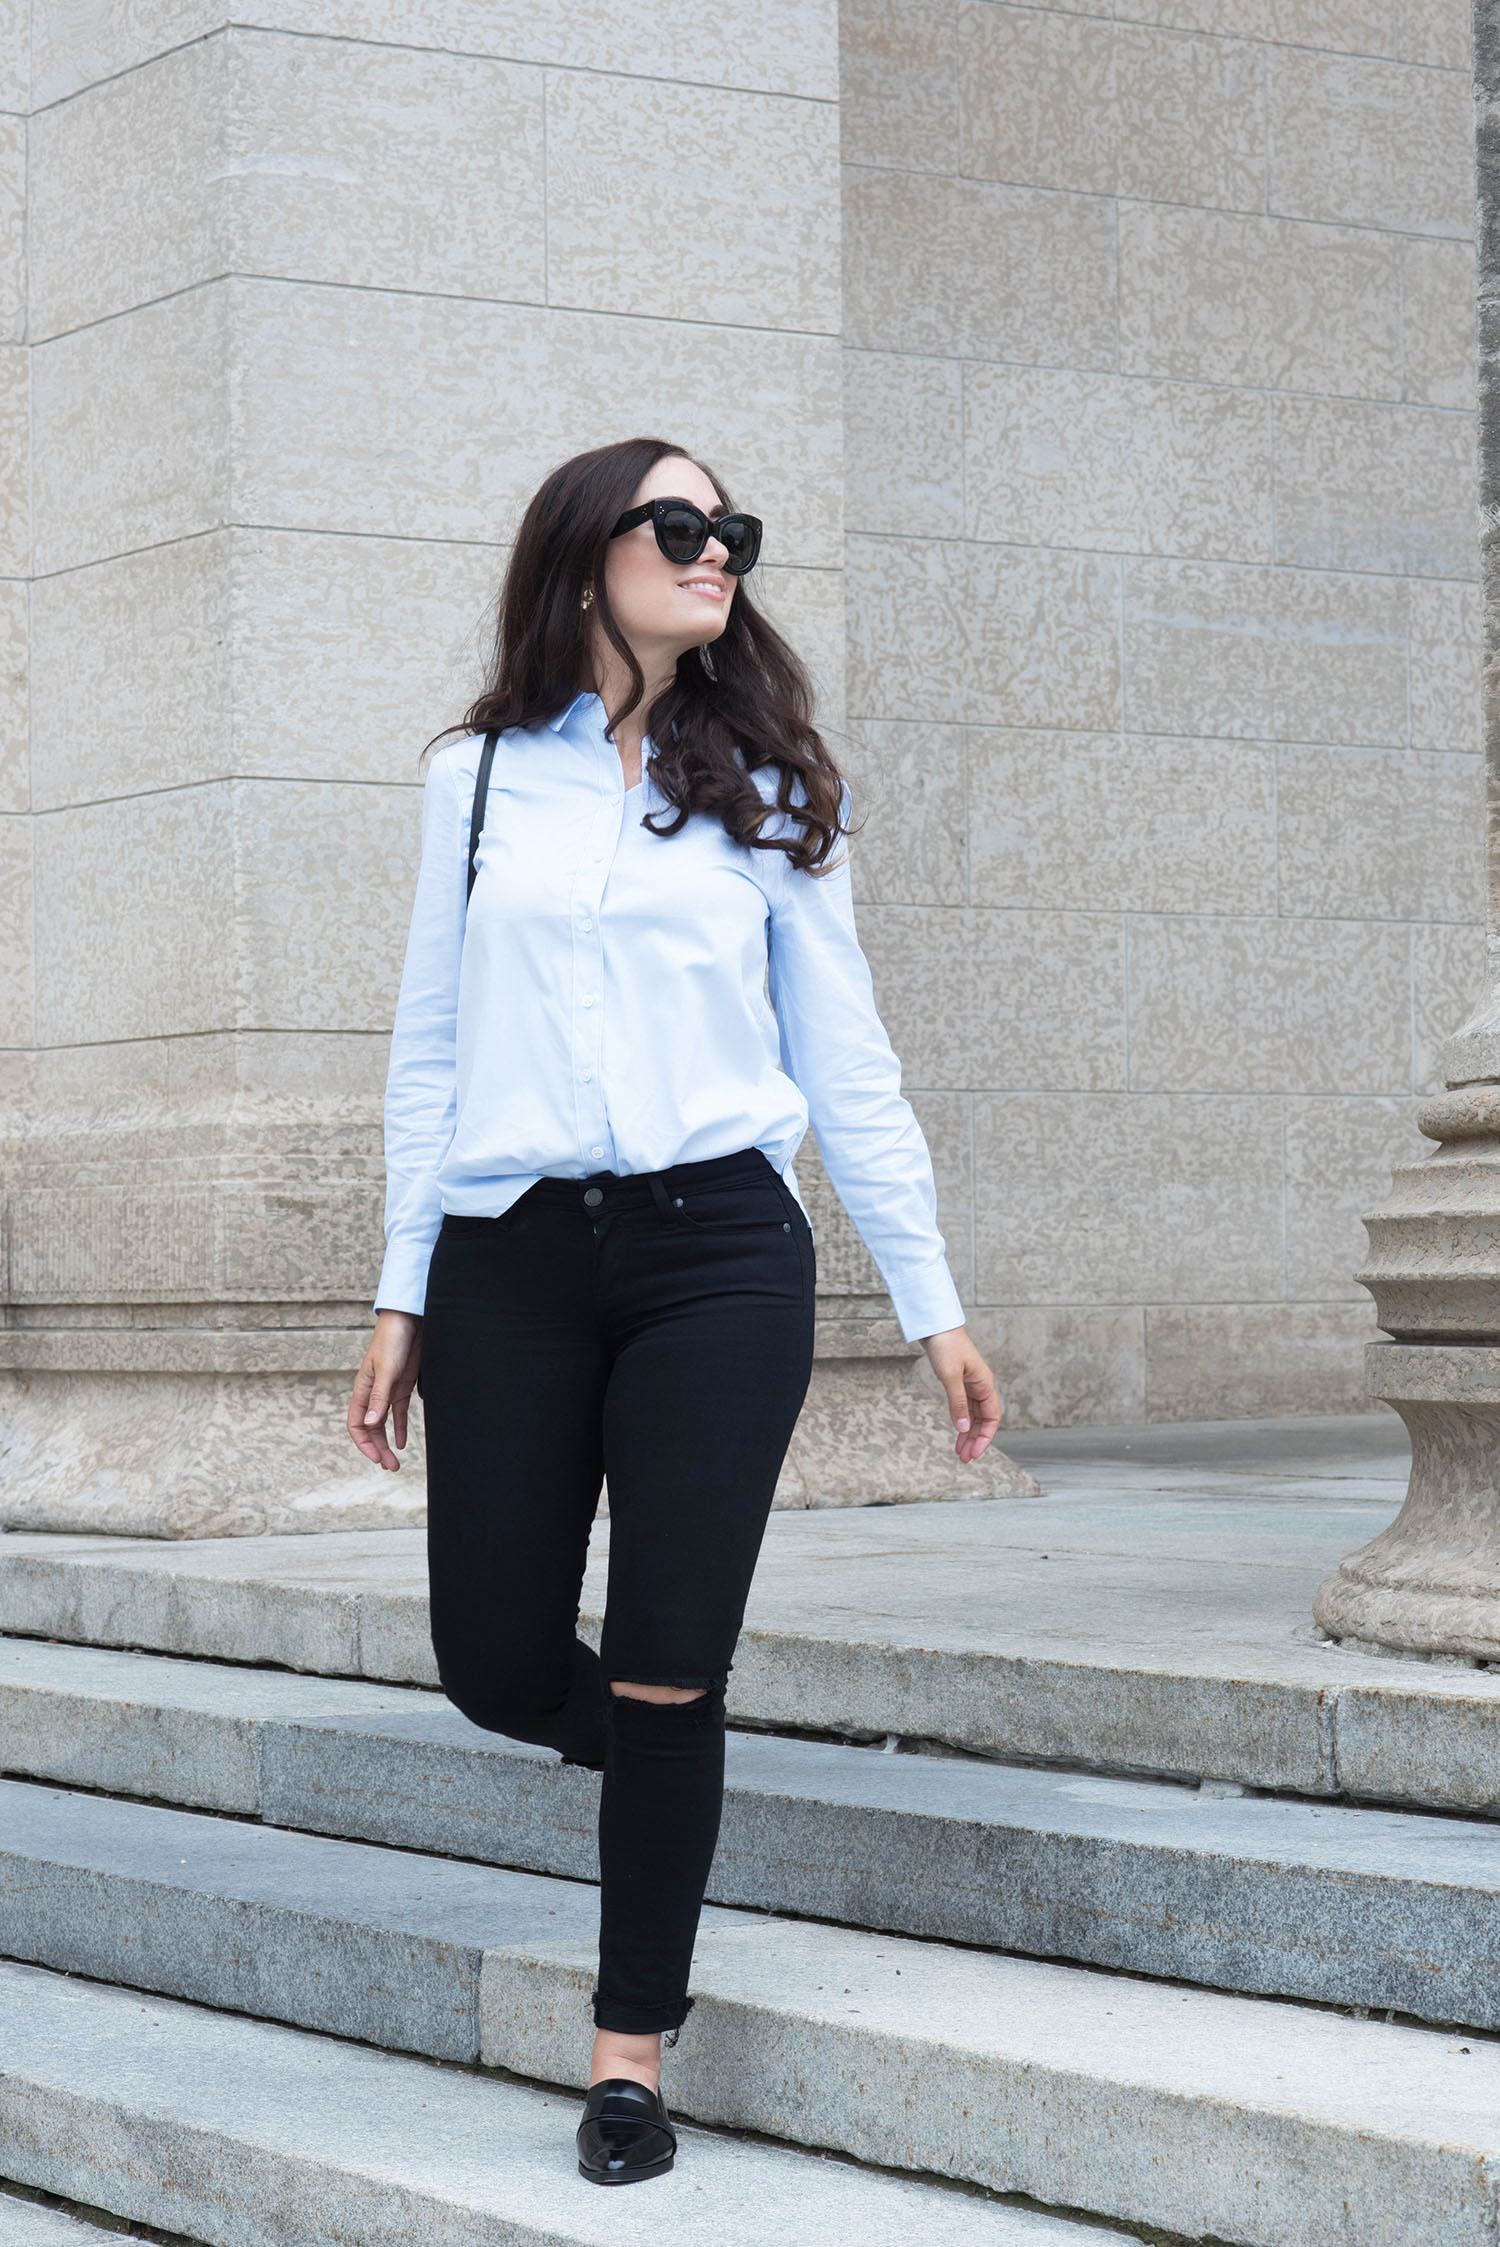 Canadian fashion blogger Cee Fardoe of Coco & Vera walks down a flight of stairs wearing an Equipment cotton blouse and Paige Denim jeans